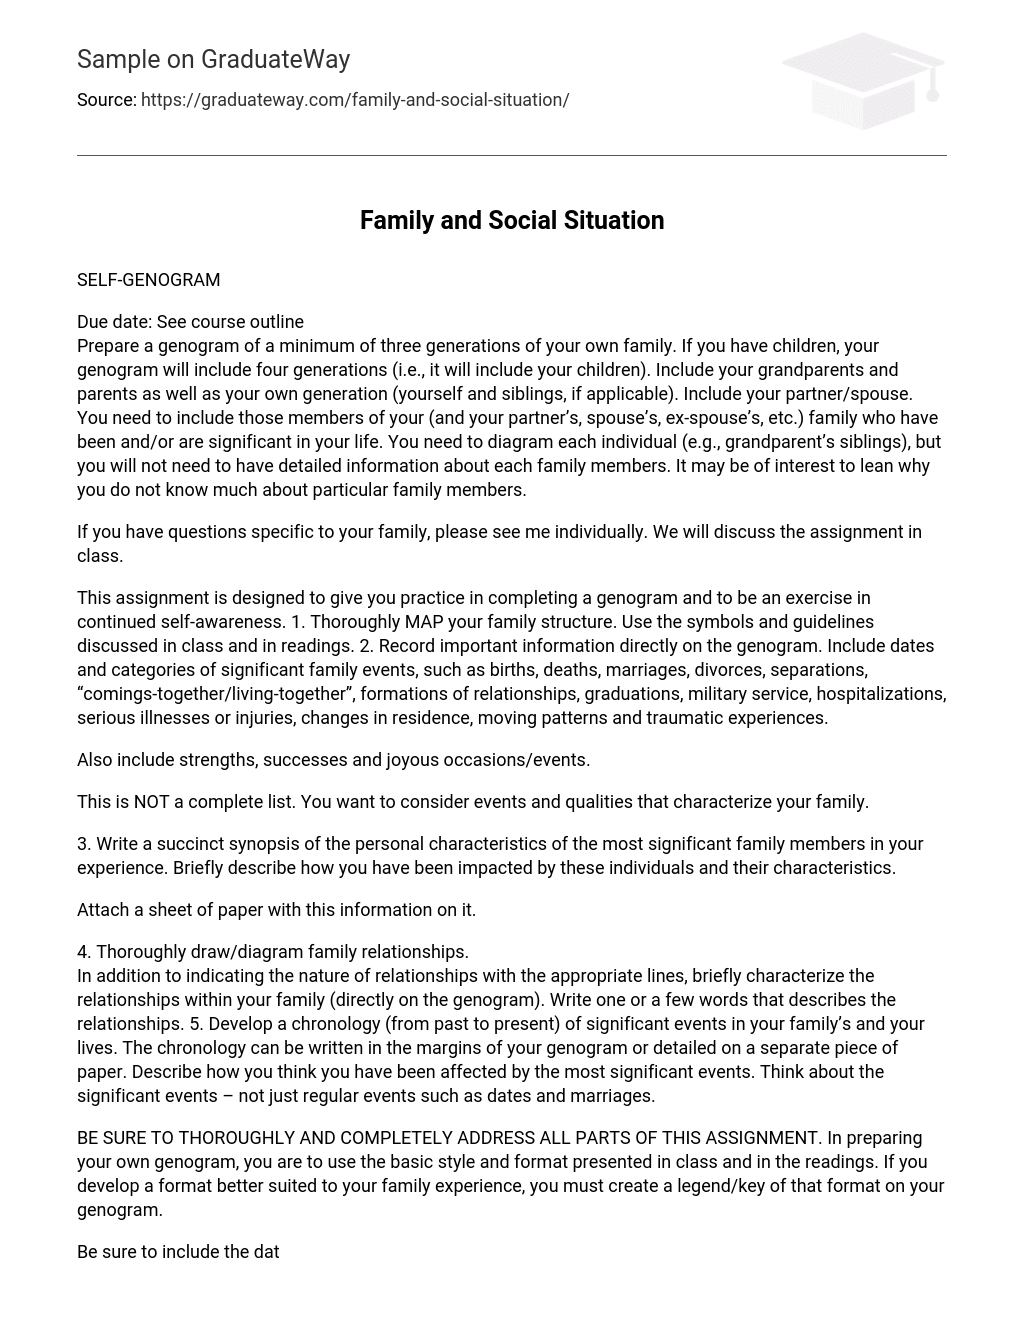 Family and Social Situation